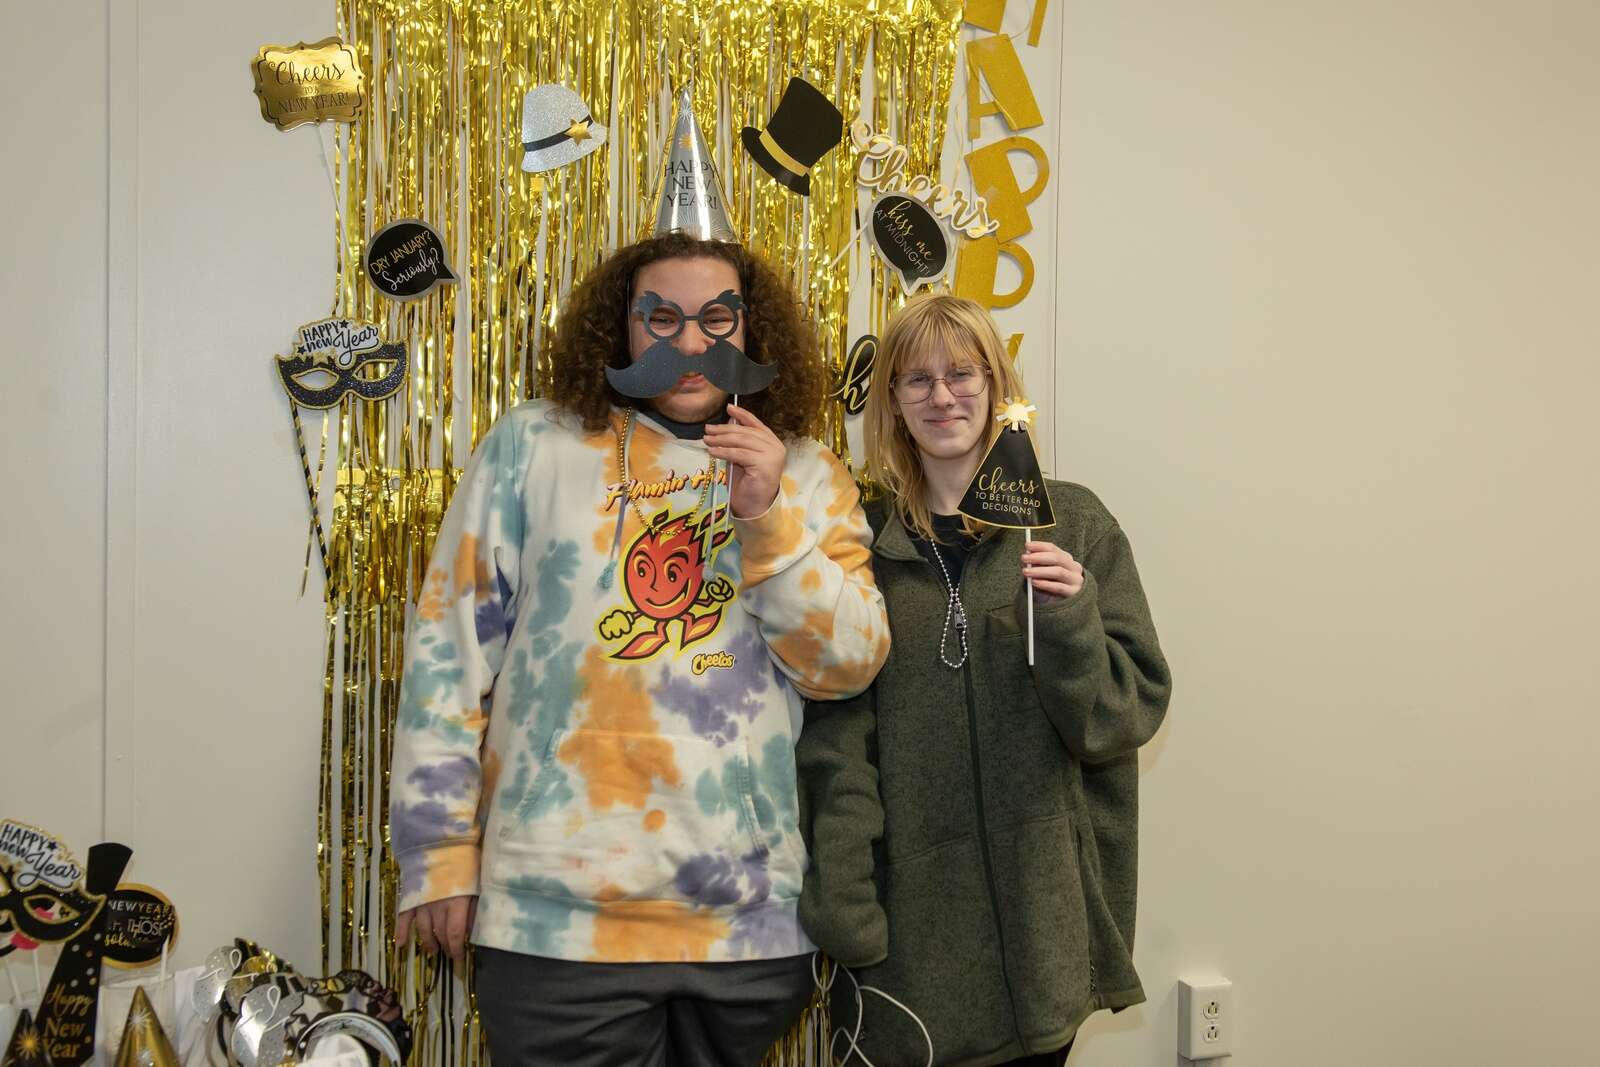 Butler SUCCEED's third annual Sober New Year’s Eve Party